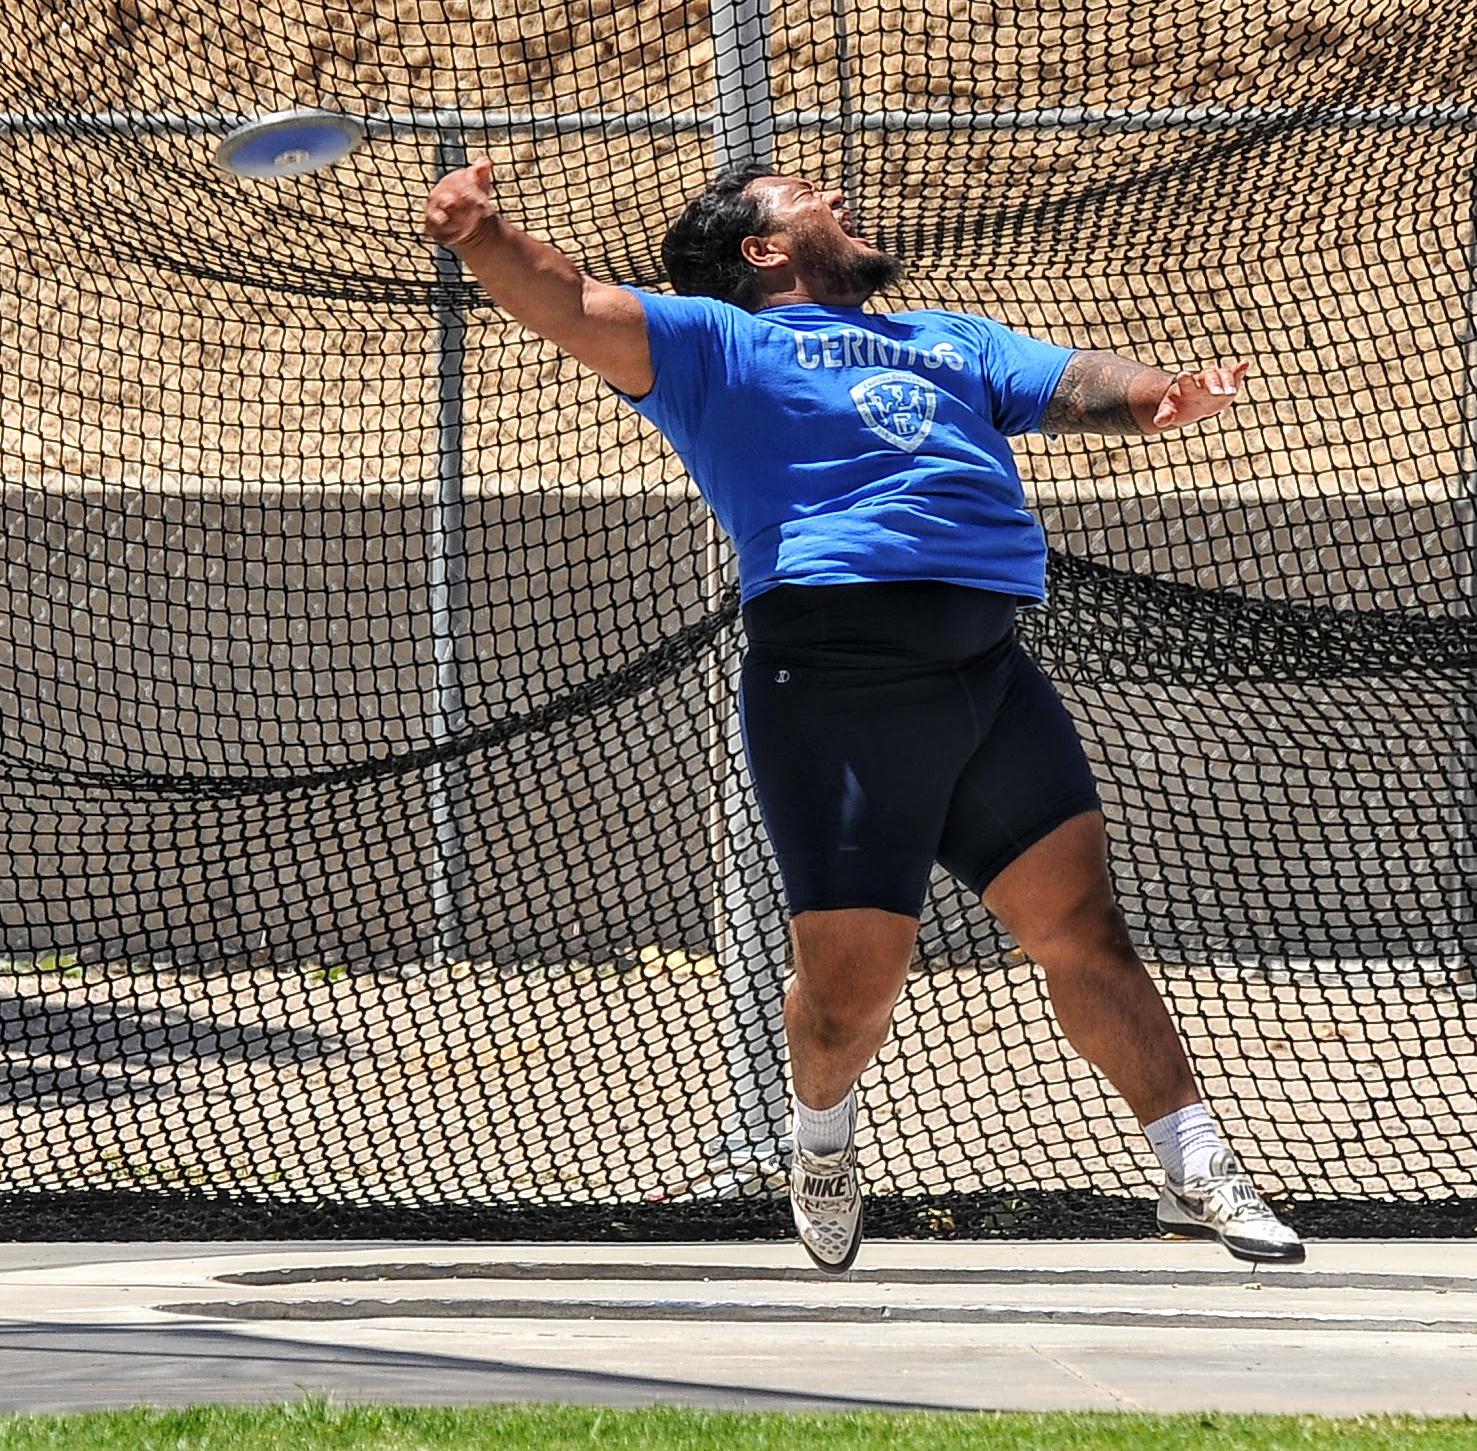 Casanova Ah-Fook placed fourth in the discus